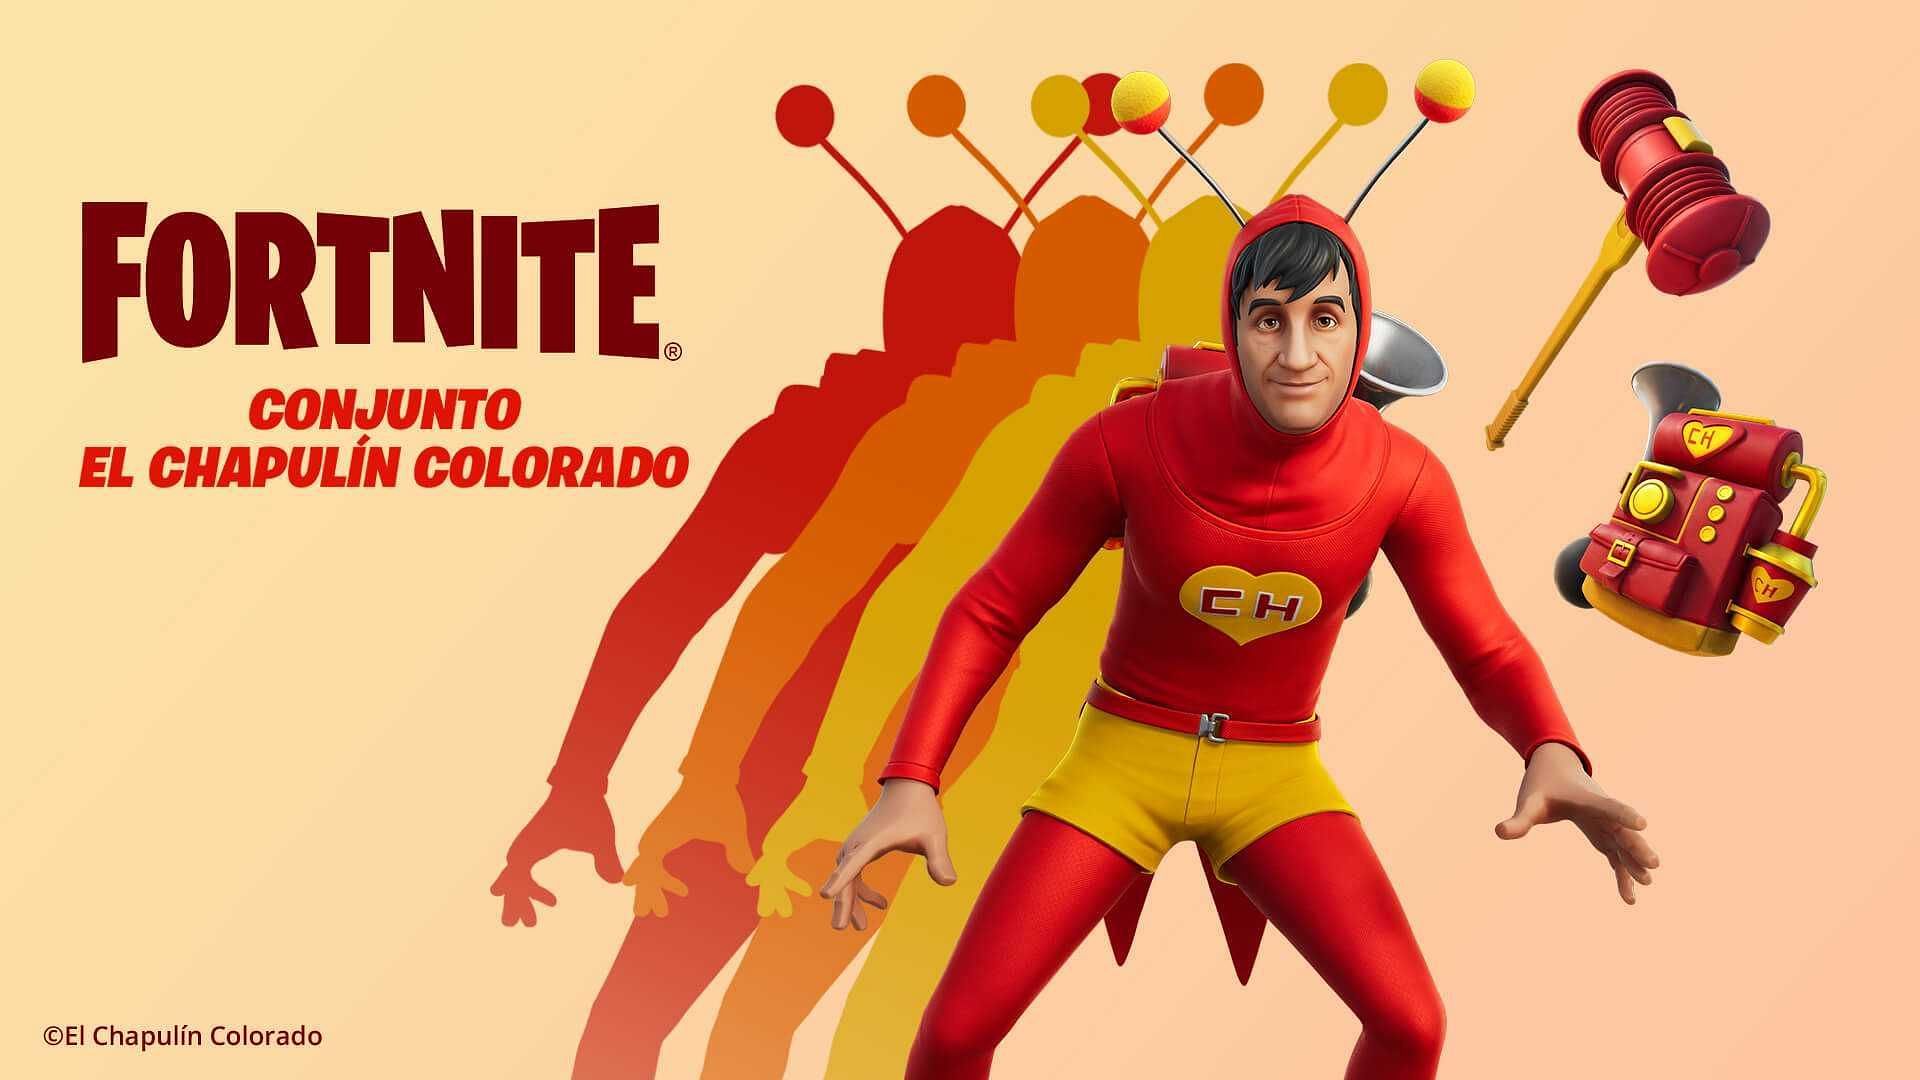 Fortnite&#039;s latest collaboration features El Chapulin Colorado from the comedy TV series back in the 1970s (Image via Epic Games)